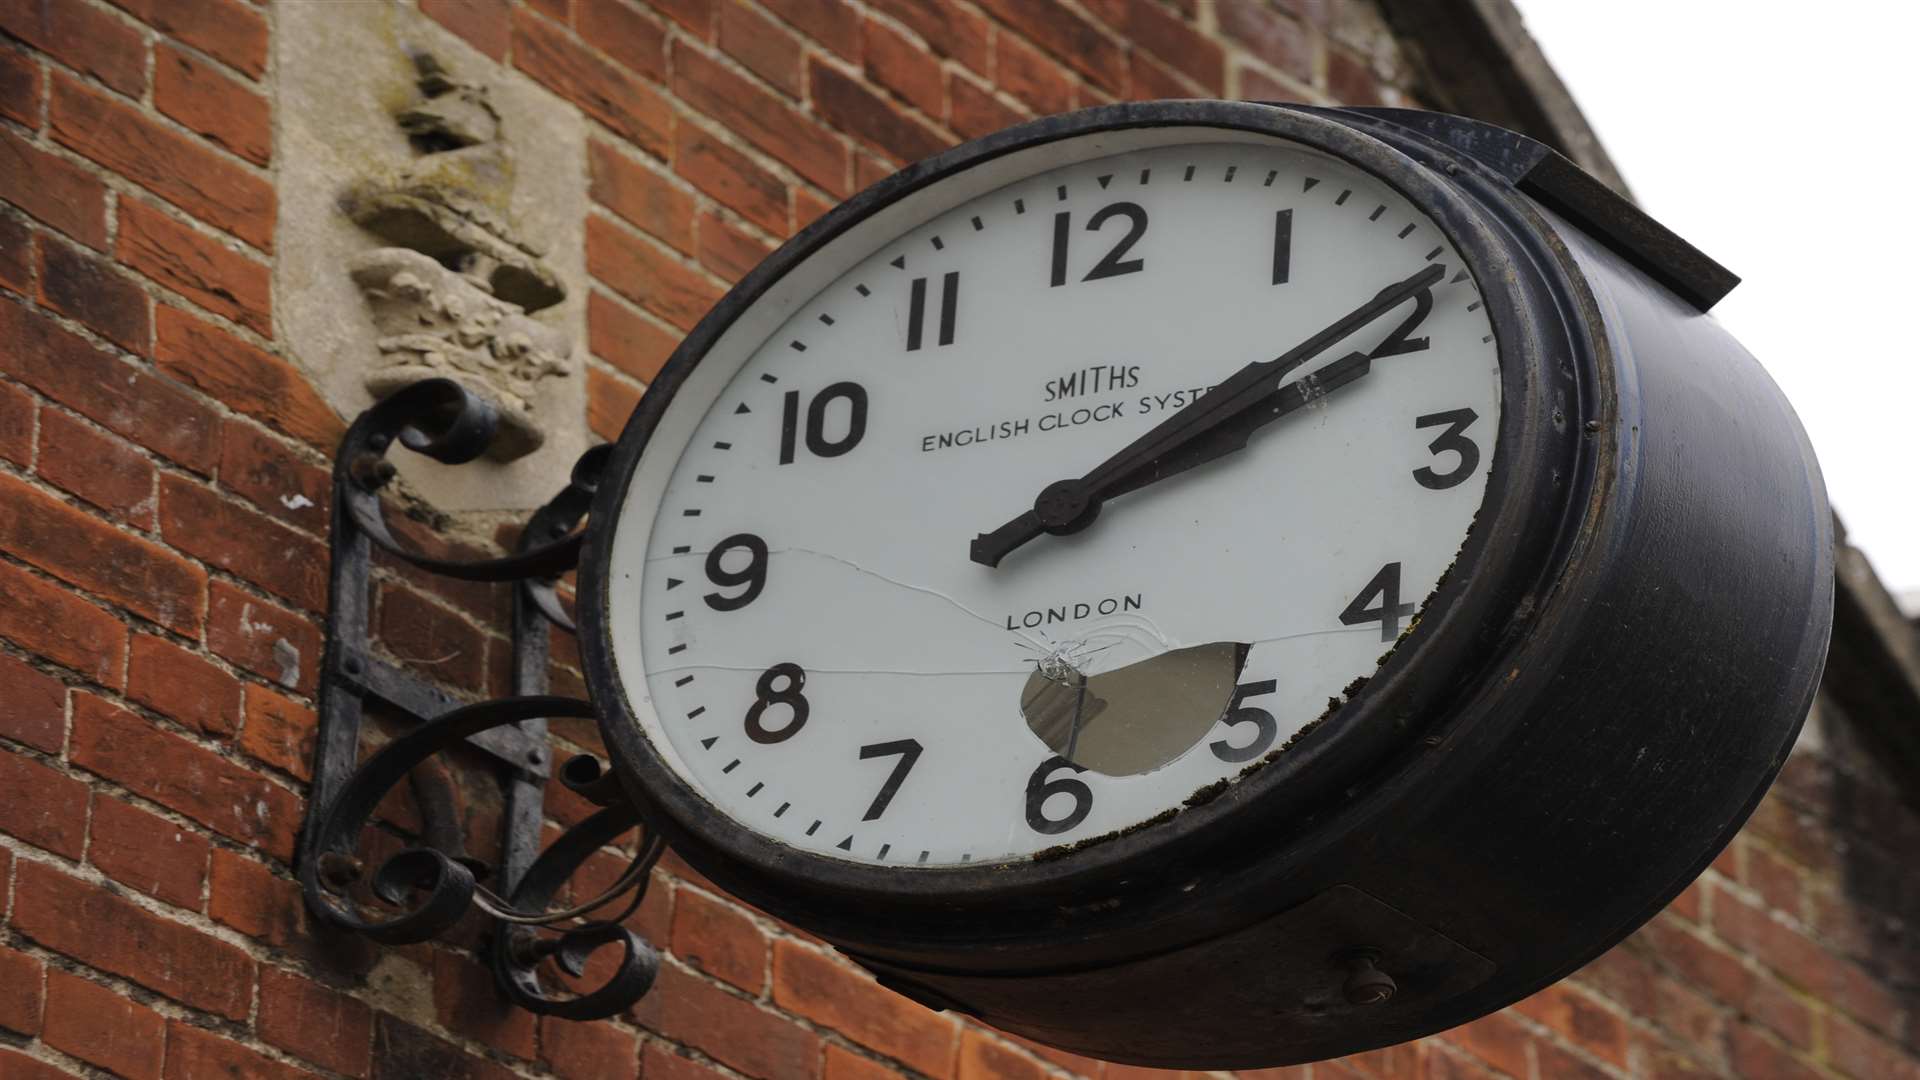 Vandals damaged the dial in the memorial clock